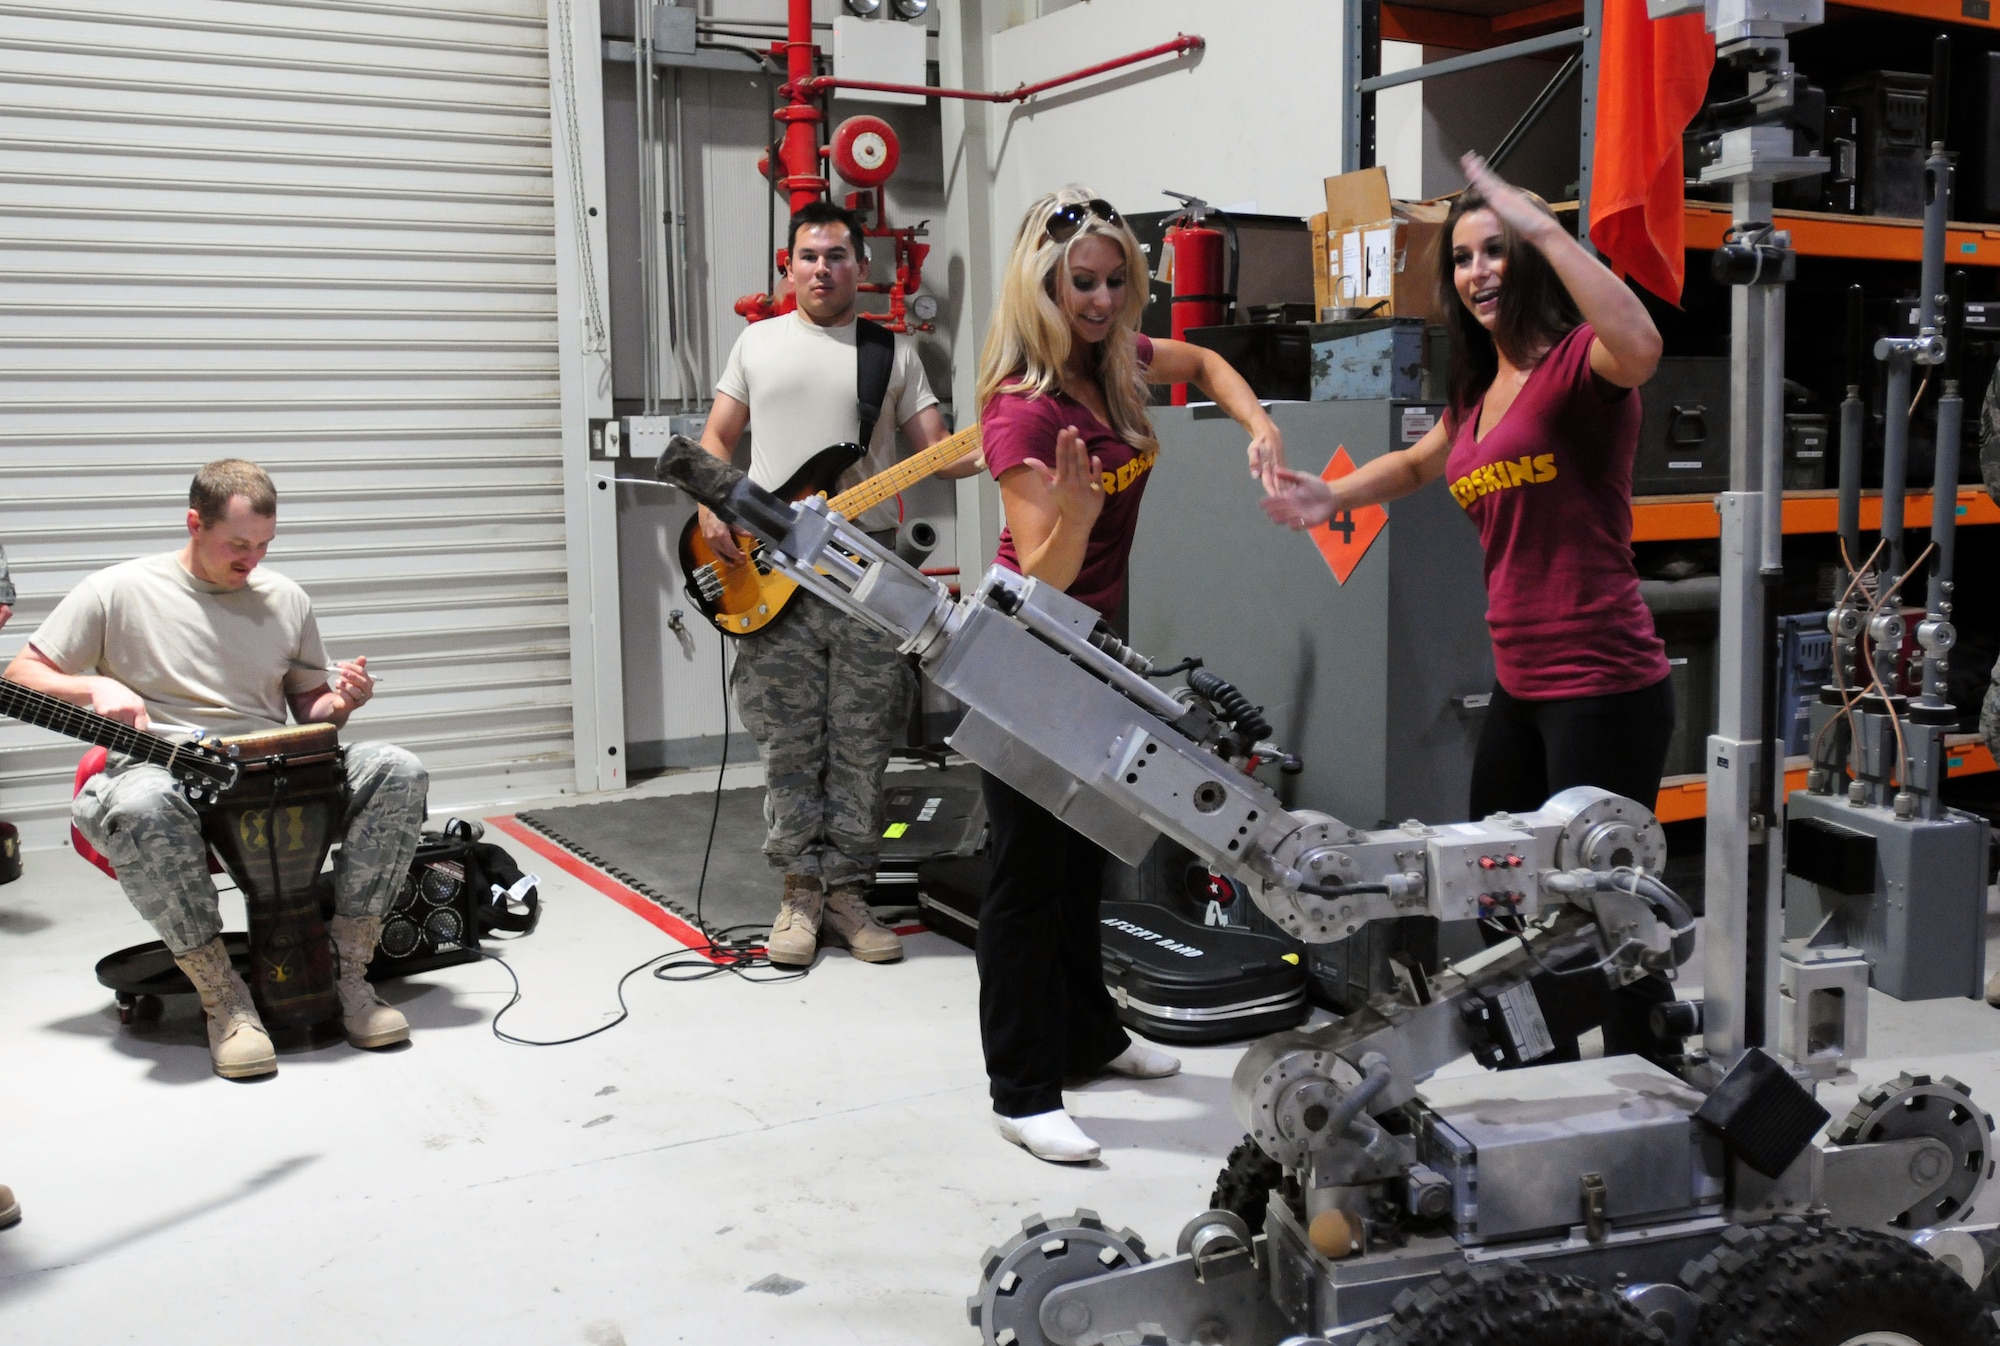 Washington Redskins Cheerleaders Amanda and Kristen dance with a robot from the Explosive Ordnance Disposal shop during a performance by Top Cover, the U.S. Air Forces Central Command band, at the 380th Air Expeditionary Wing in Southwest Asia Oct. 20, 2011. NFL players Marco Rivera and R.W. McQuarters and four members of the Washington Redskins Cheerleaders visited the 380th Air Expeditionary Wing Oct. 18-21 as part of the NFL Champions and the Washington Redskins Cheerleaders Tour from Armed Forces Entertainment. Top Cover also visited the base to perform for the deployed service members at the wing. Also pictured: Staff Sgt. Brandon Richard on drums and Airman First Class Philip Runge Jr. on bass. (U.S. Air Force photo/Capt. Gina Vaccaro McKeen)